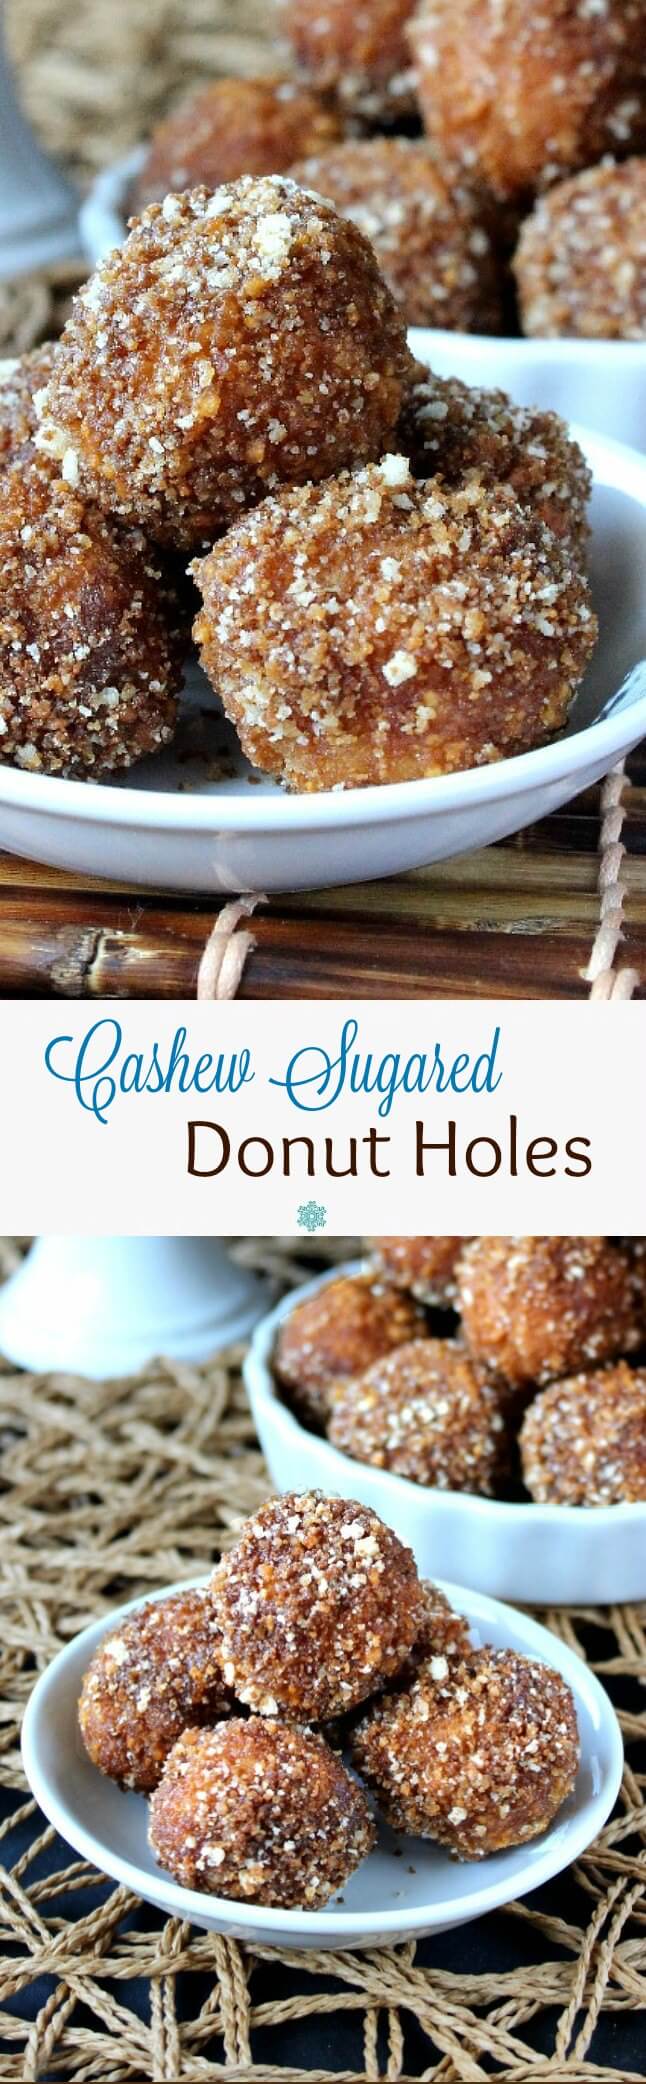 Can You Make Donut Holes In An Air Fryer